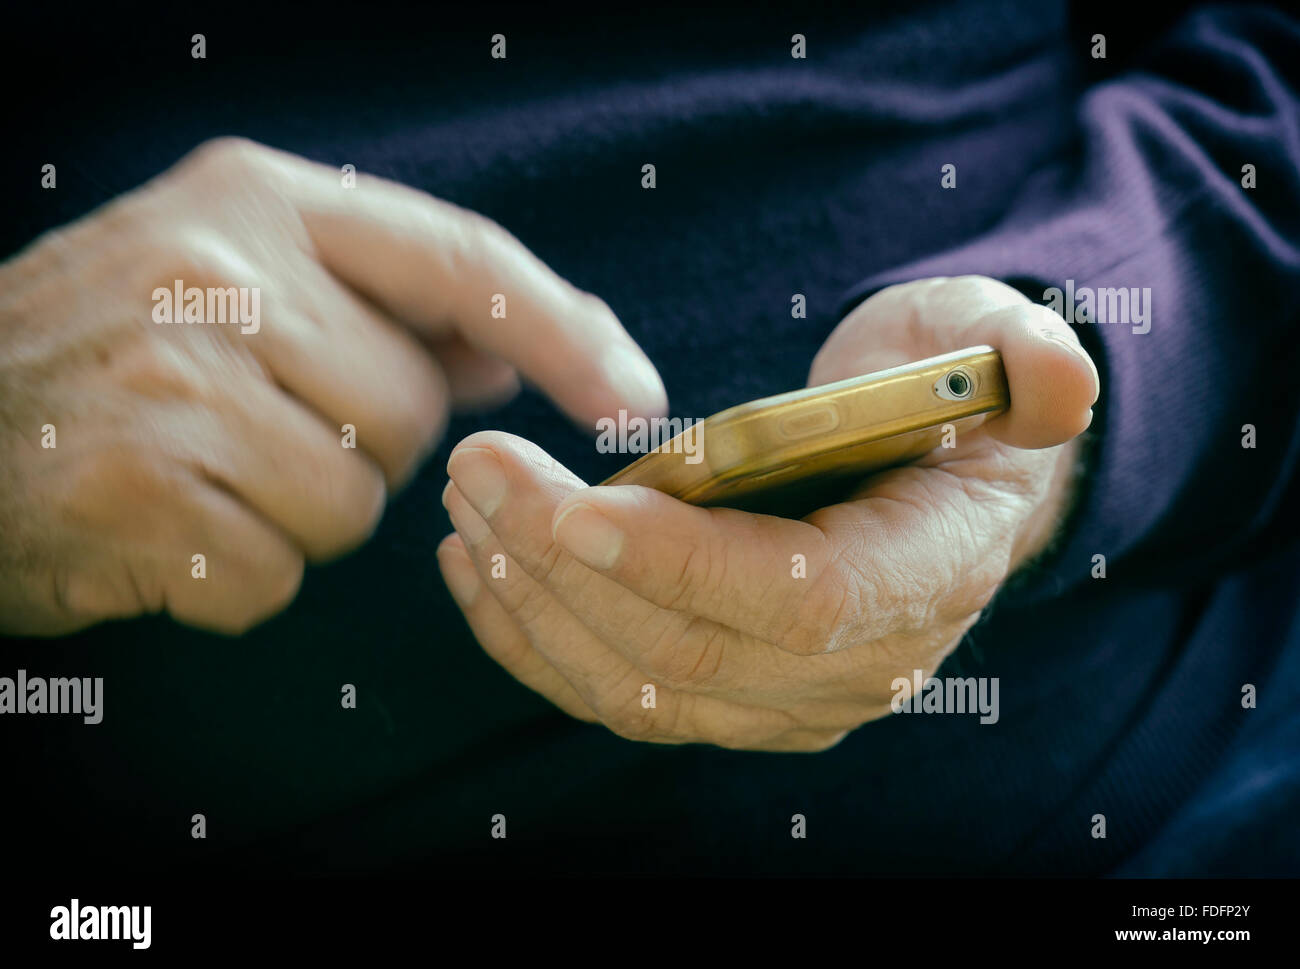 Male hands entering information on smart phone. Stock Photo